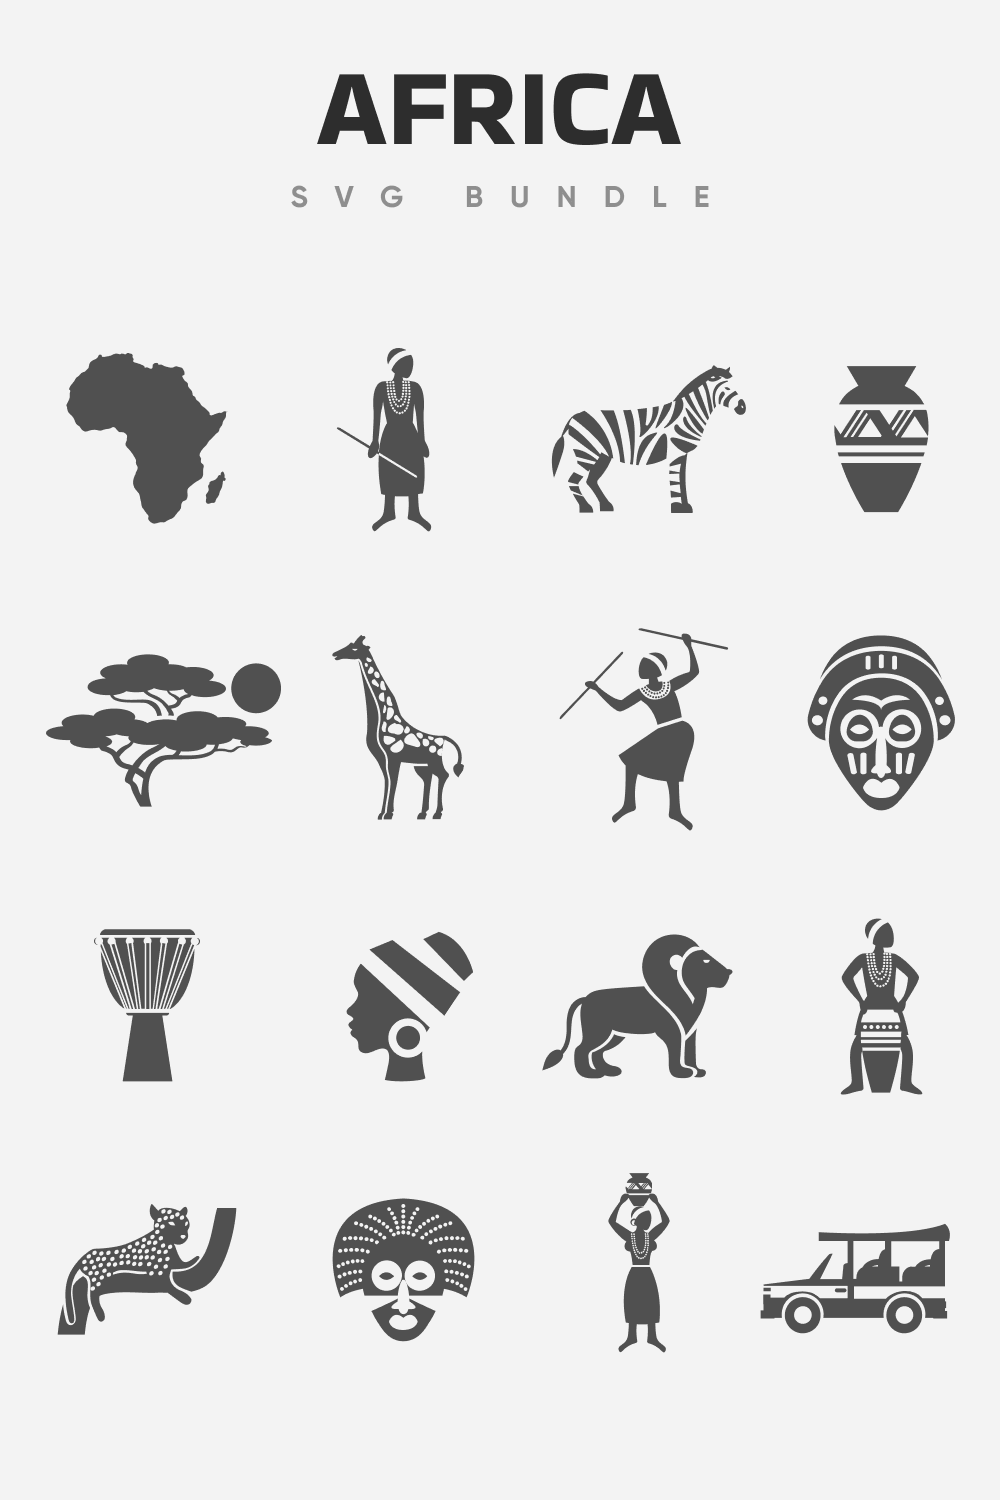 African life content pictures: wild tribes, giraffes, zebras, lions, shaman masks.